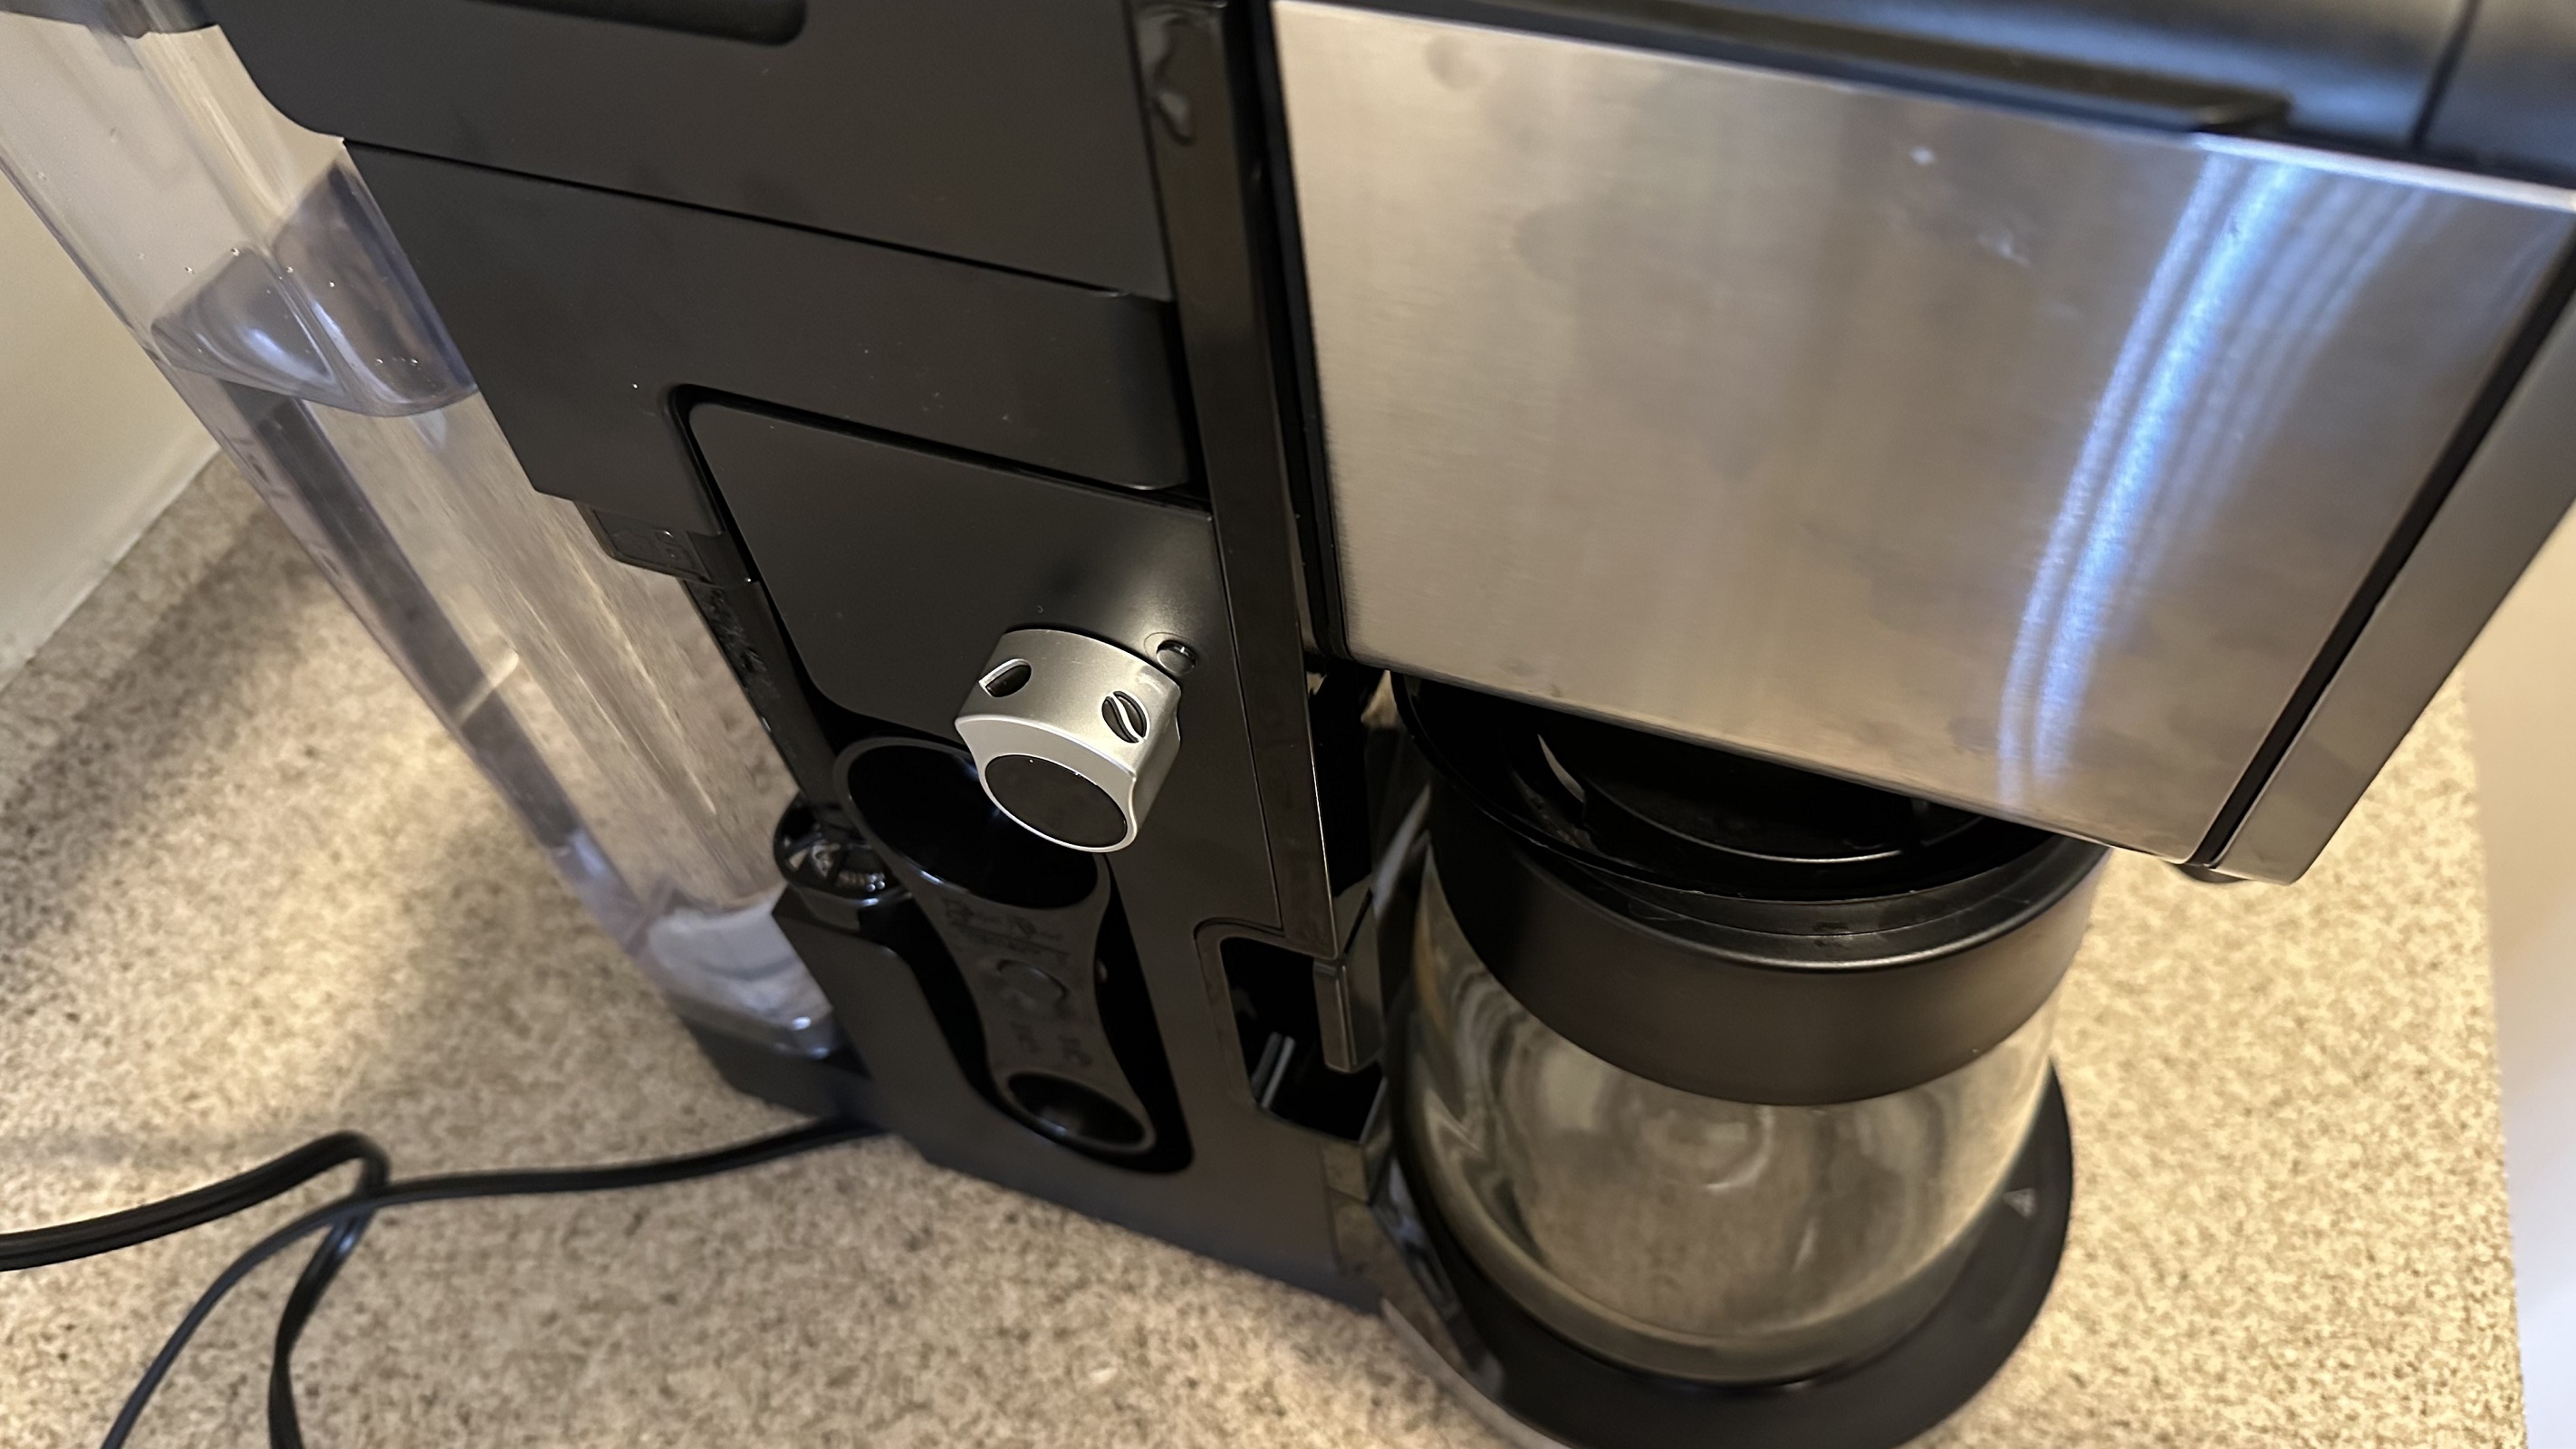 Knob to switch from coffee to hot water with Ninja Smart Scoop and milk frother